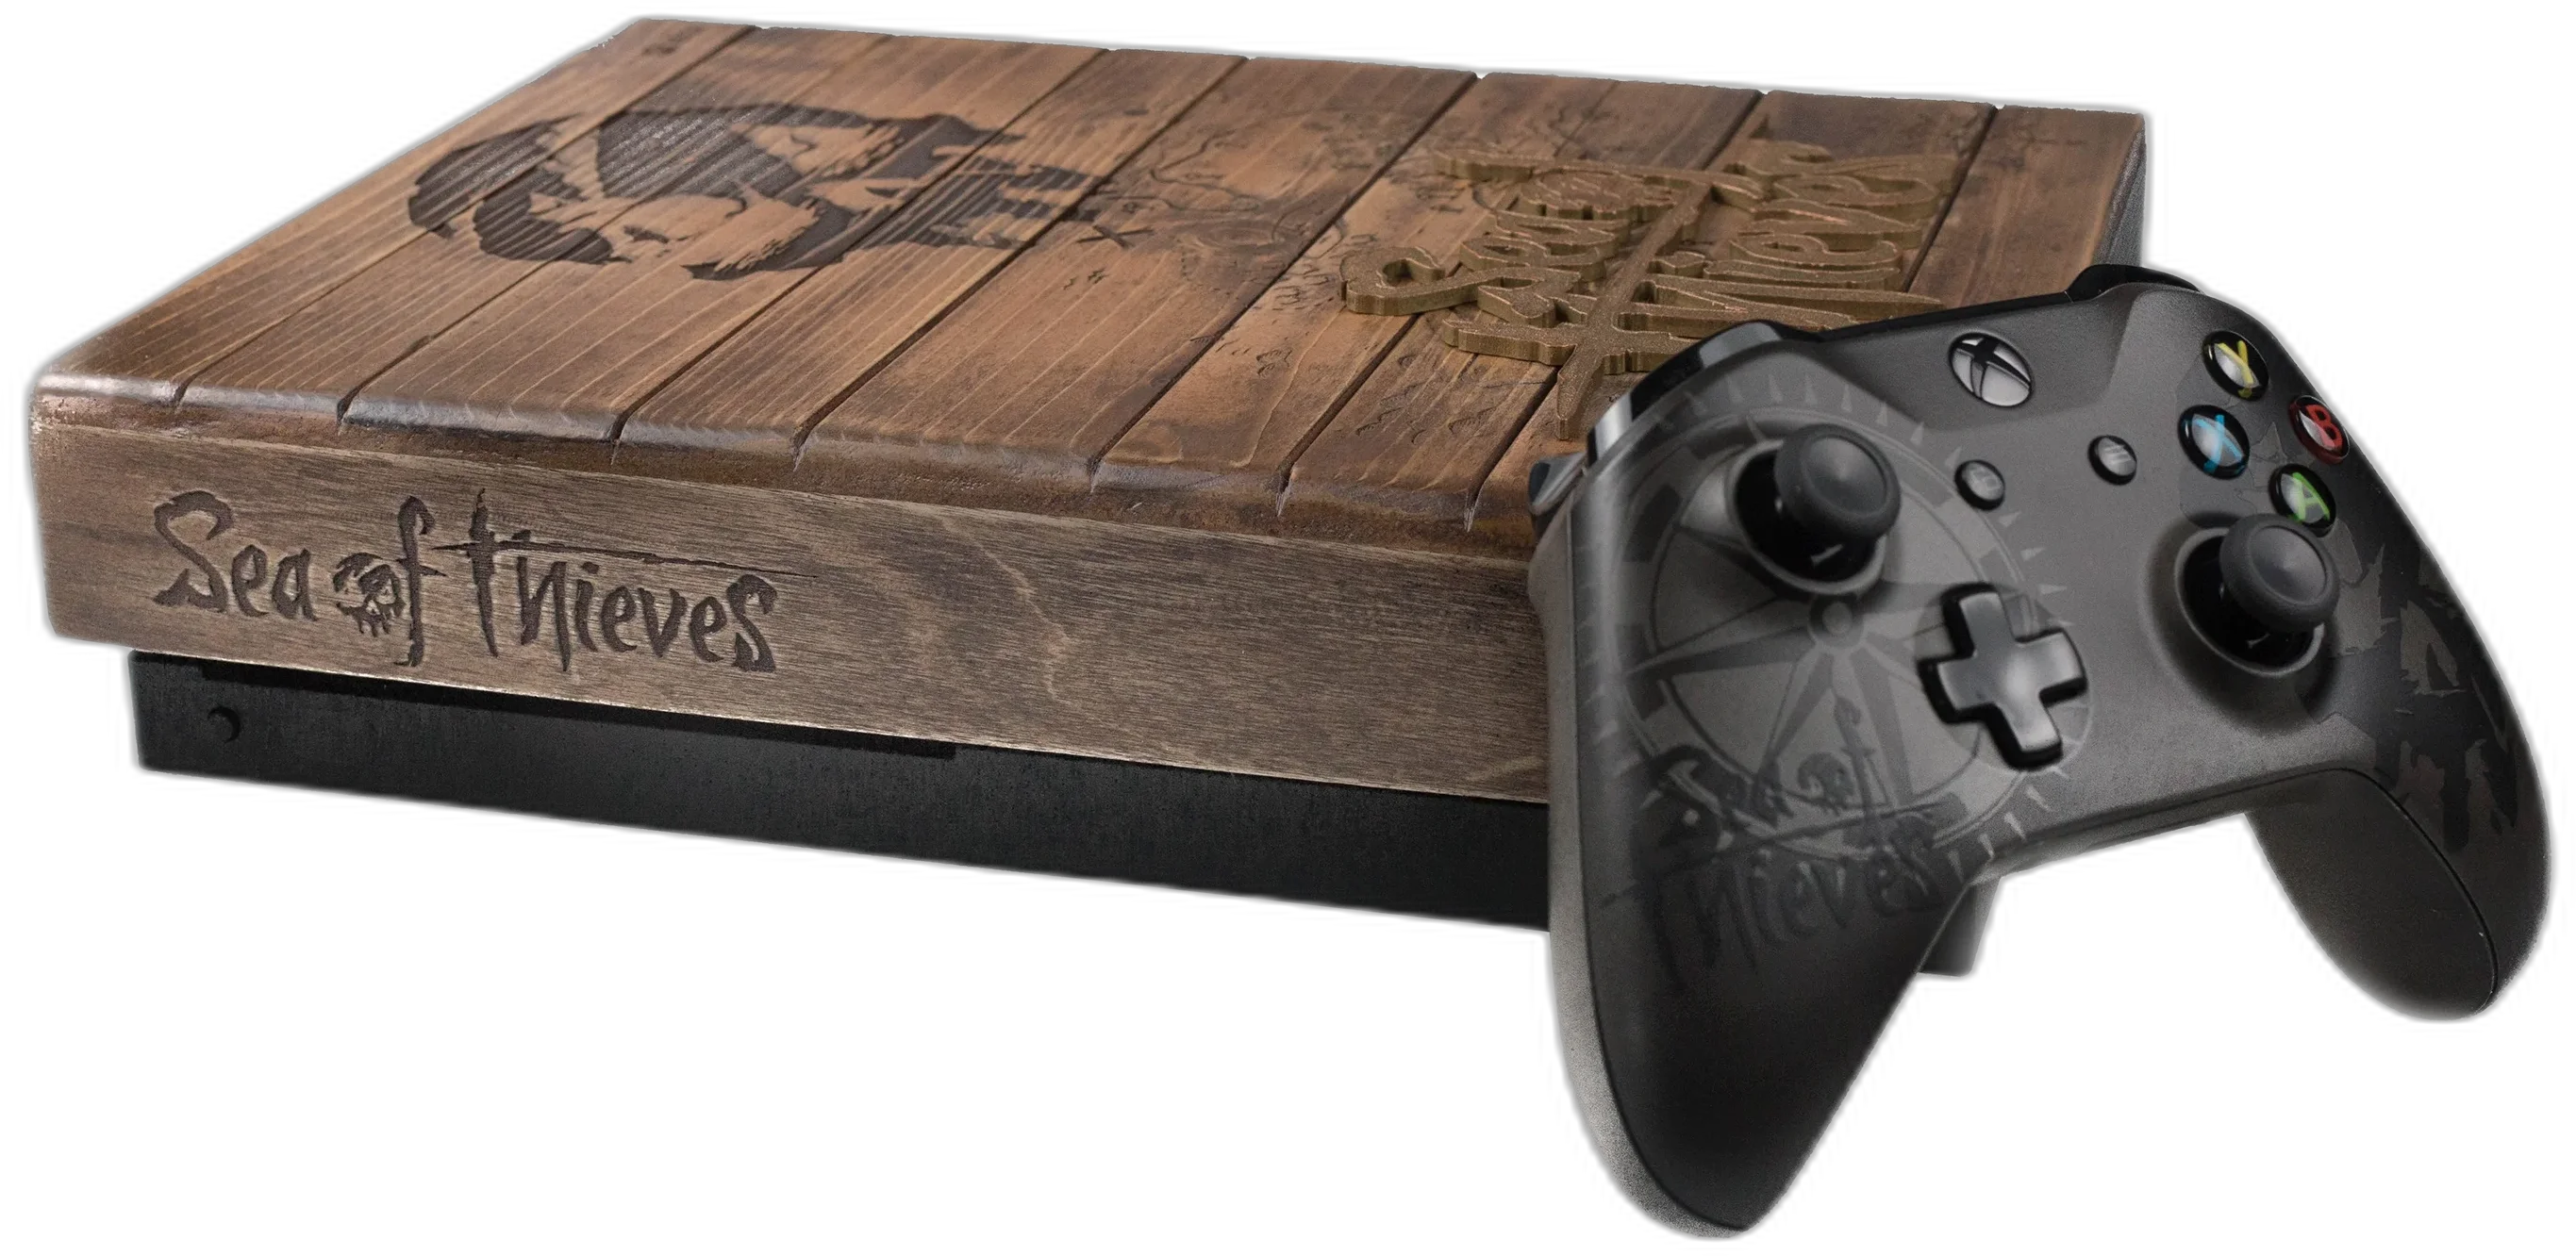  Microsoft Xbox One X Sea of Thieves Wooden Console